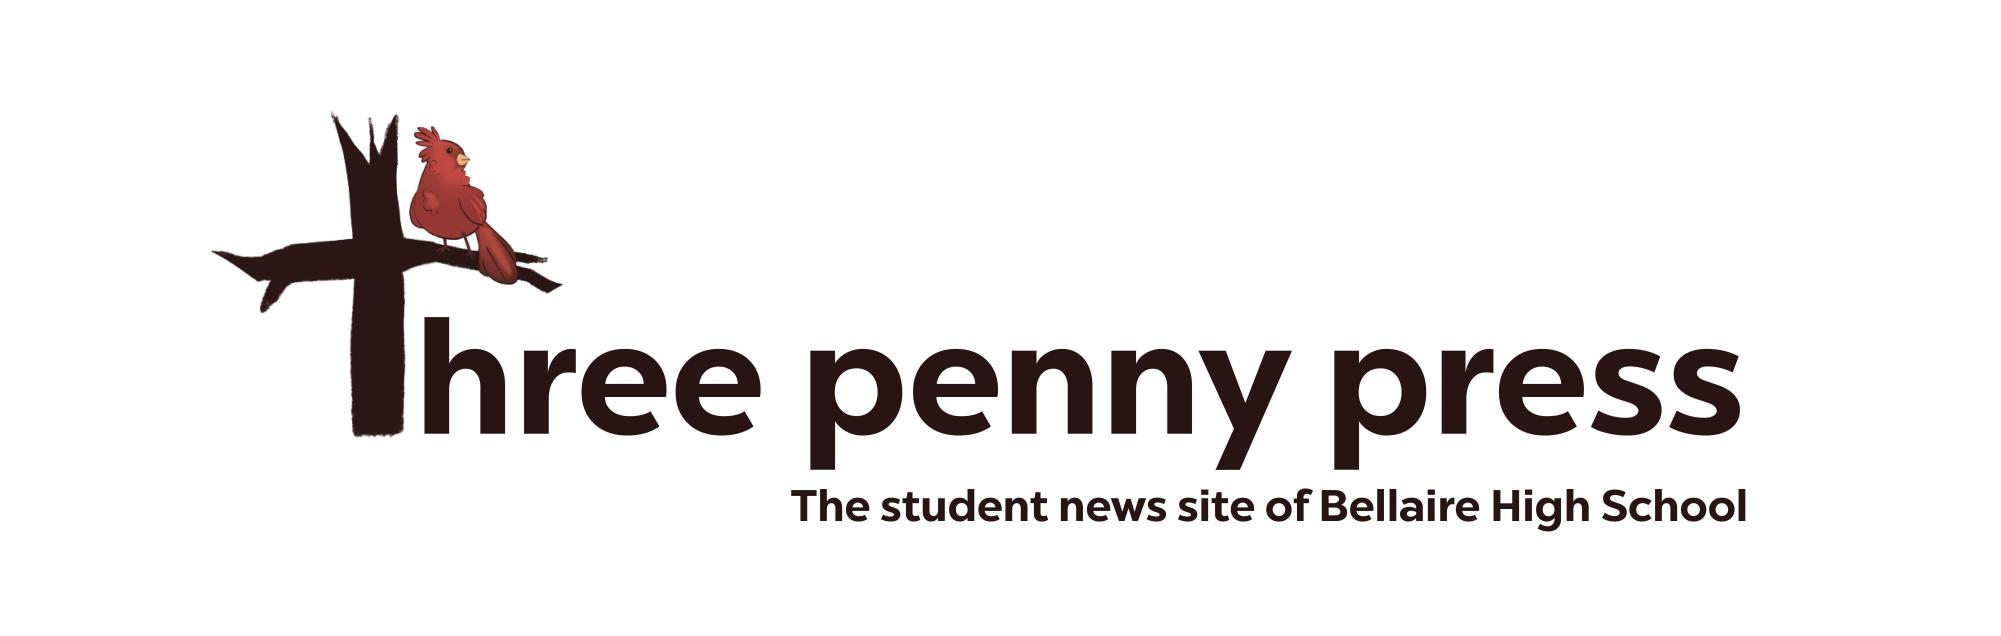 The student news site of Bellaire High School